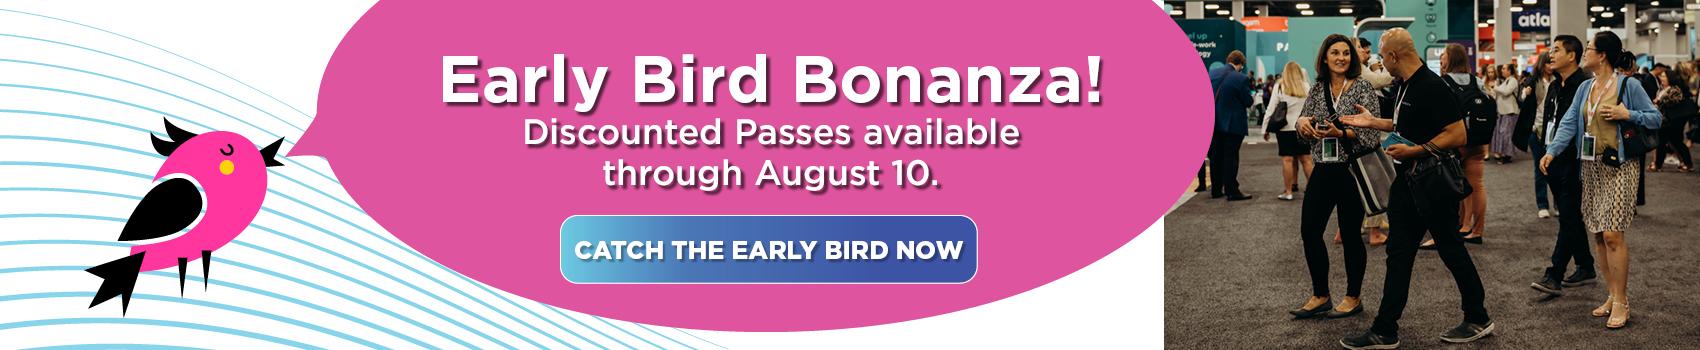 Early Bird Bonanza! Discounted Passes available through August 15.  Catch the Early Bird Now